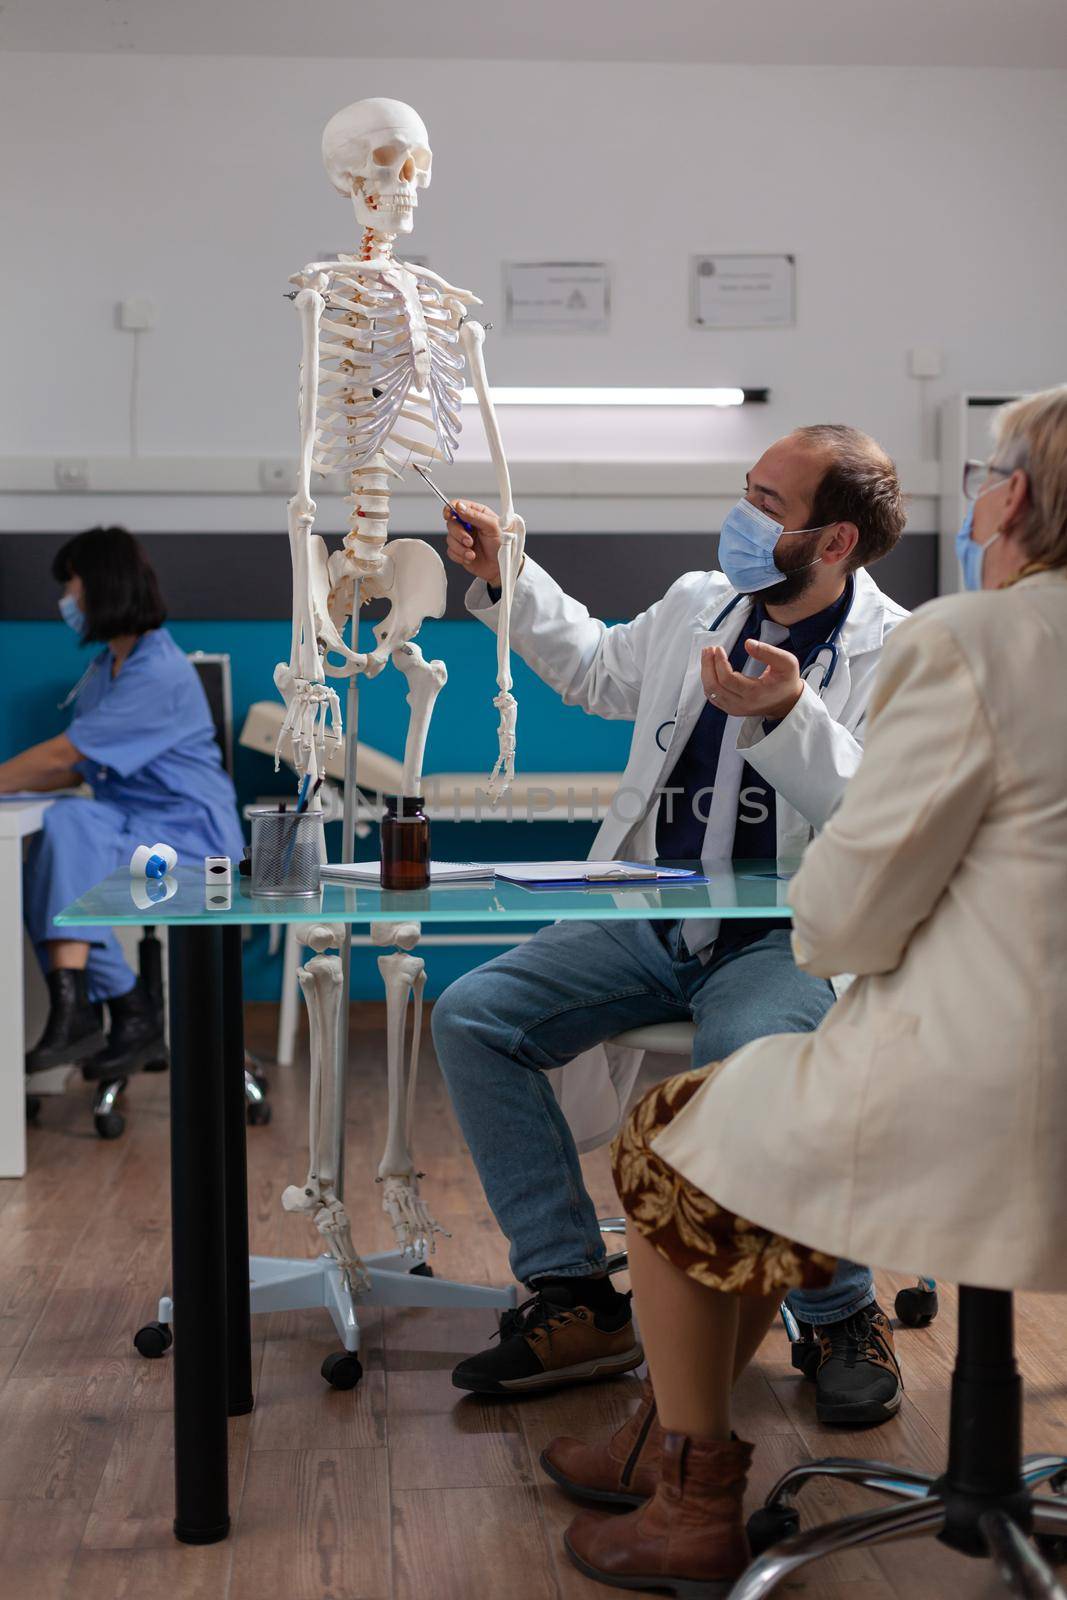 Physician showing human skeleton to pensioner woman at exam appointment, explaining bones injury at osteopathy checkup during covid 19 pandemic. Medic pointing at orthopedic model.